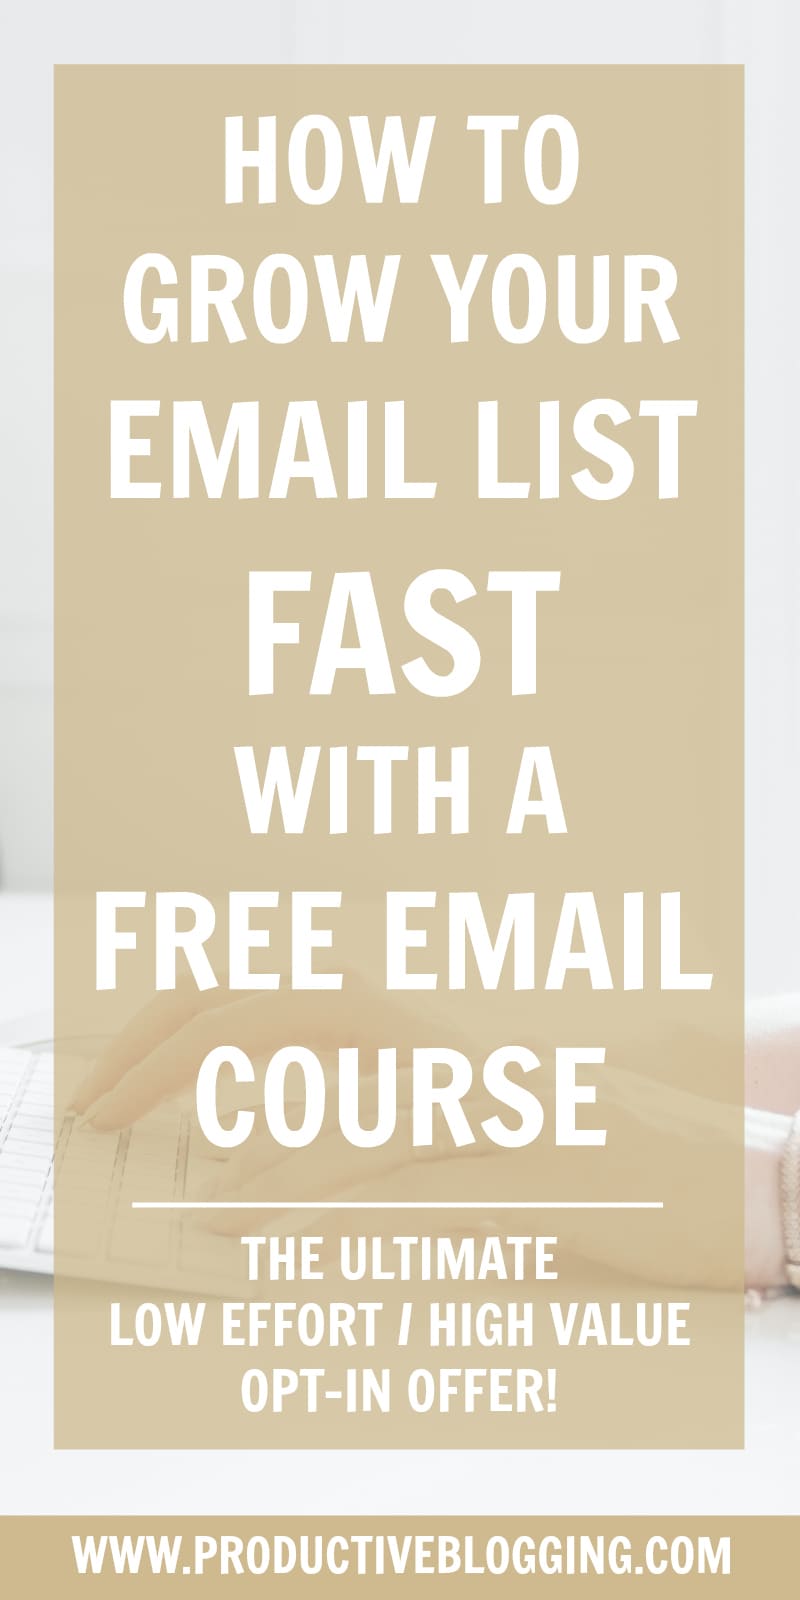 The ultimate low effort, high value offer to get more of the right people onto your email list: here’s how to grow your email list FAST with a free email course. #freeemailcourse #freecourse #emailcourse #optinoffer #emailmarketing #growyouremaillist #emailmarketingtips #emaillist #emaillistgrowth #listbuilding #subscribers #convertkit #growyourblog #bloggrowth #productivity #productivitytips #bloggingtips #productiveblogging #blogsmarter #blogsmarternotharder